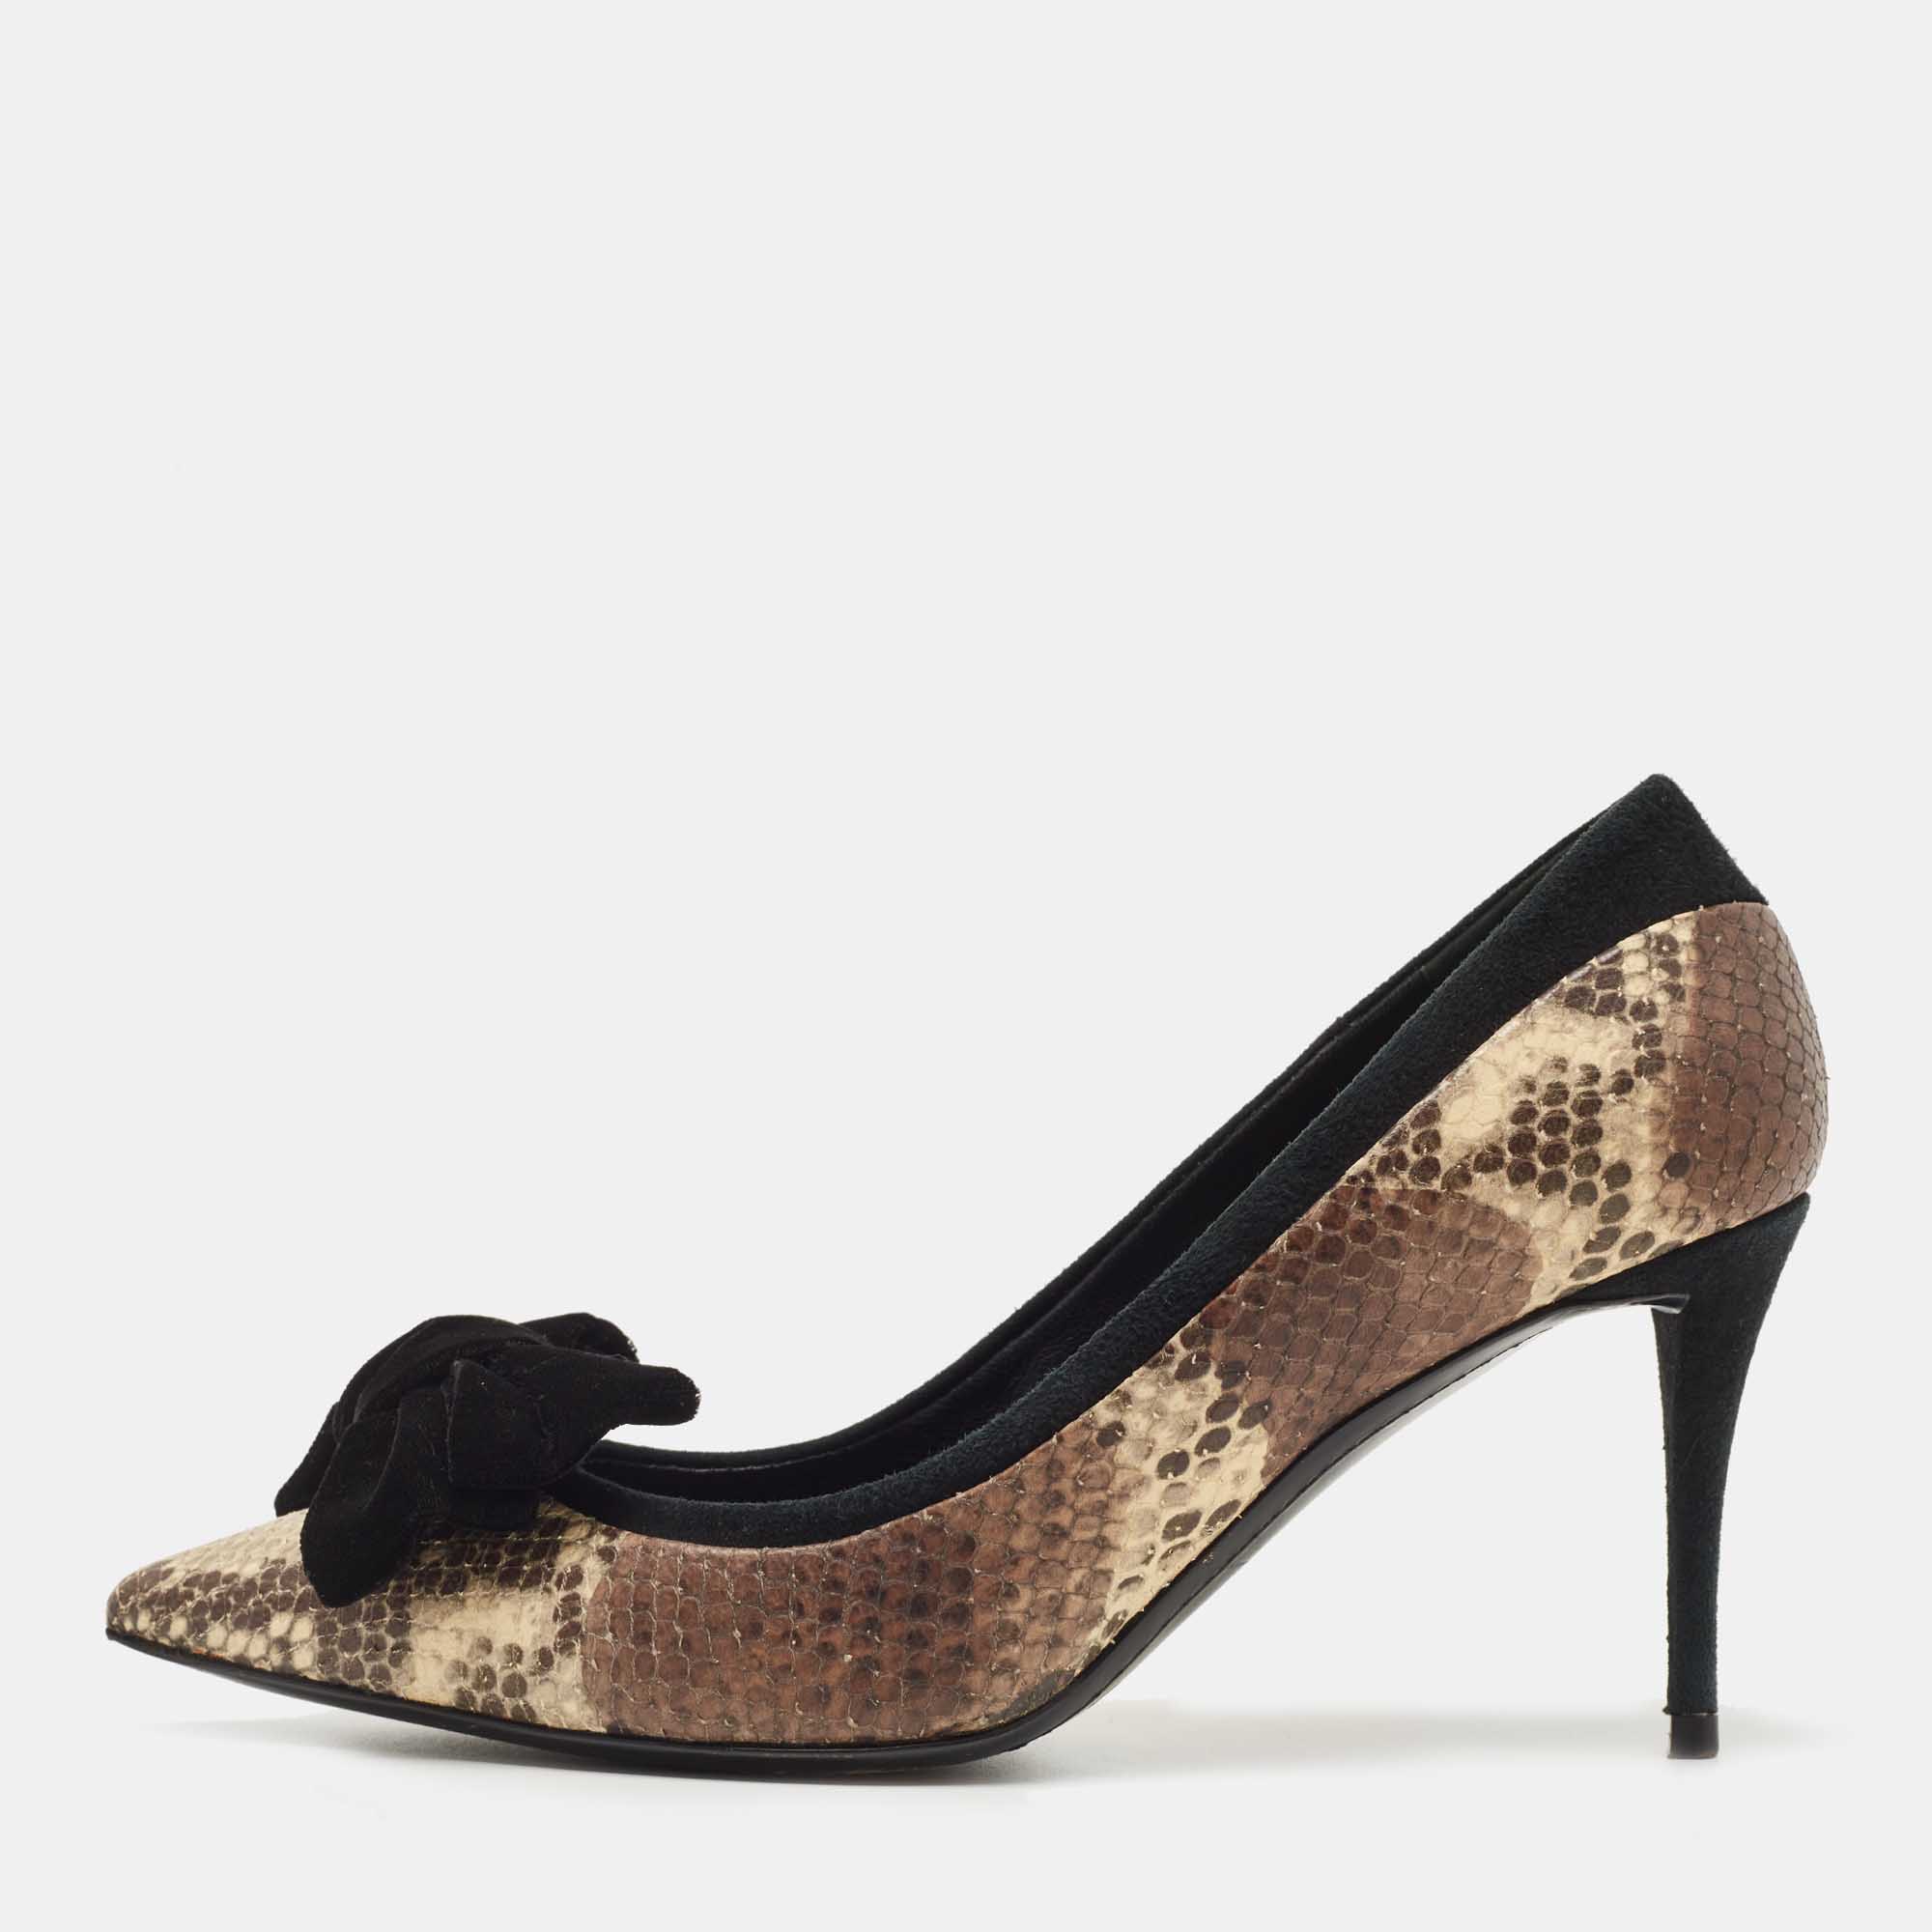 Giuseppe zanotti brown/black suede and python embossed bow pointed toe pumps size 39